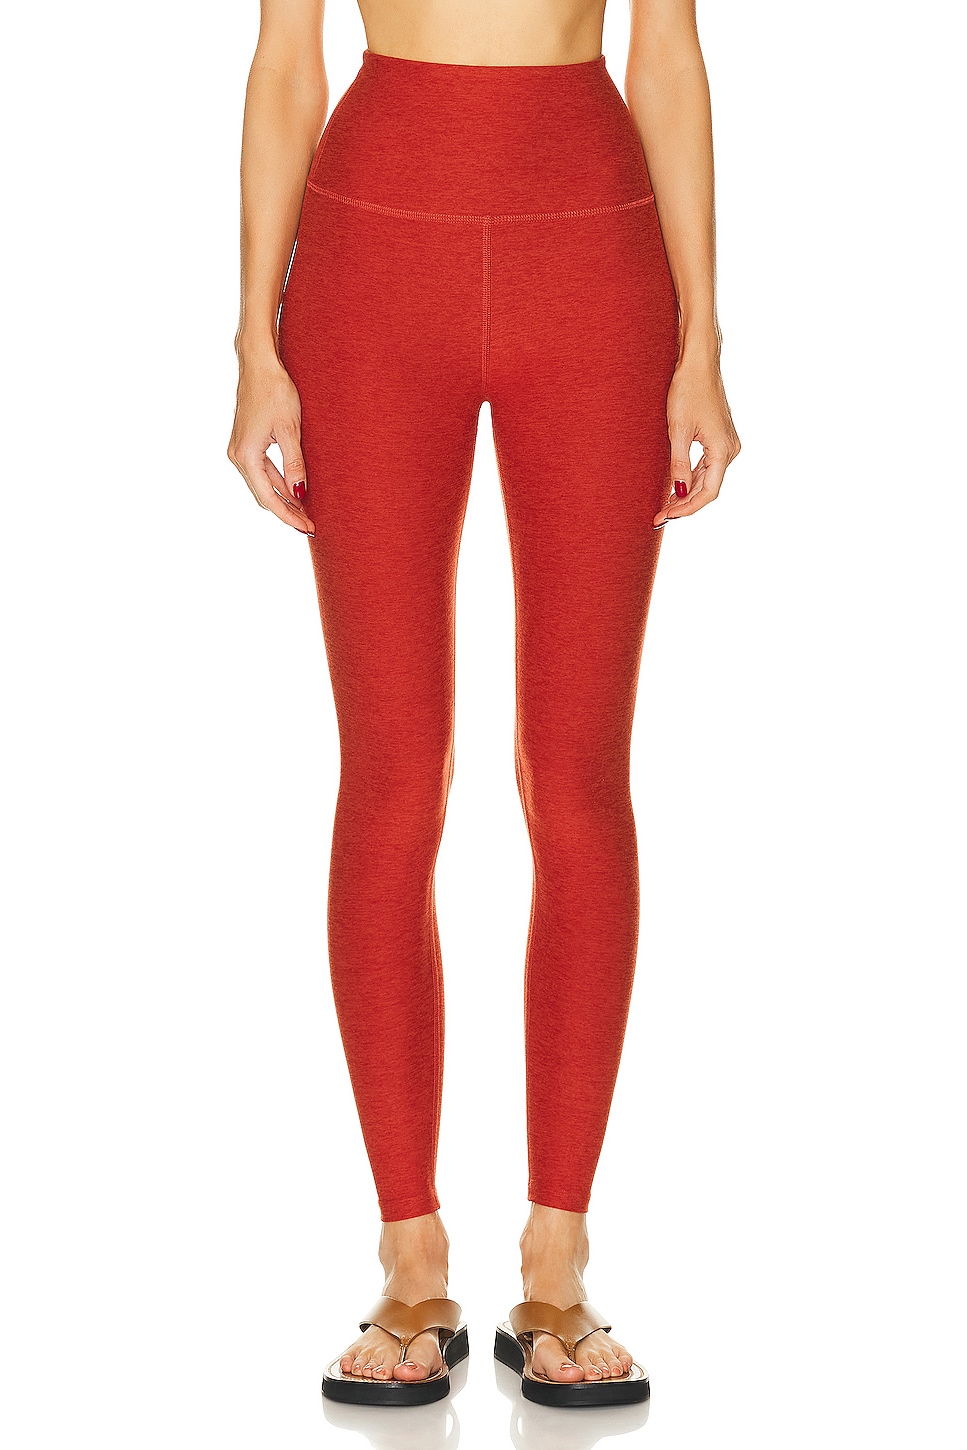 Image 1 of Beyond Yoga Spacedye Caught In The Midi High Waisted Legging in Red Sand Heather